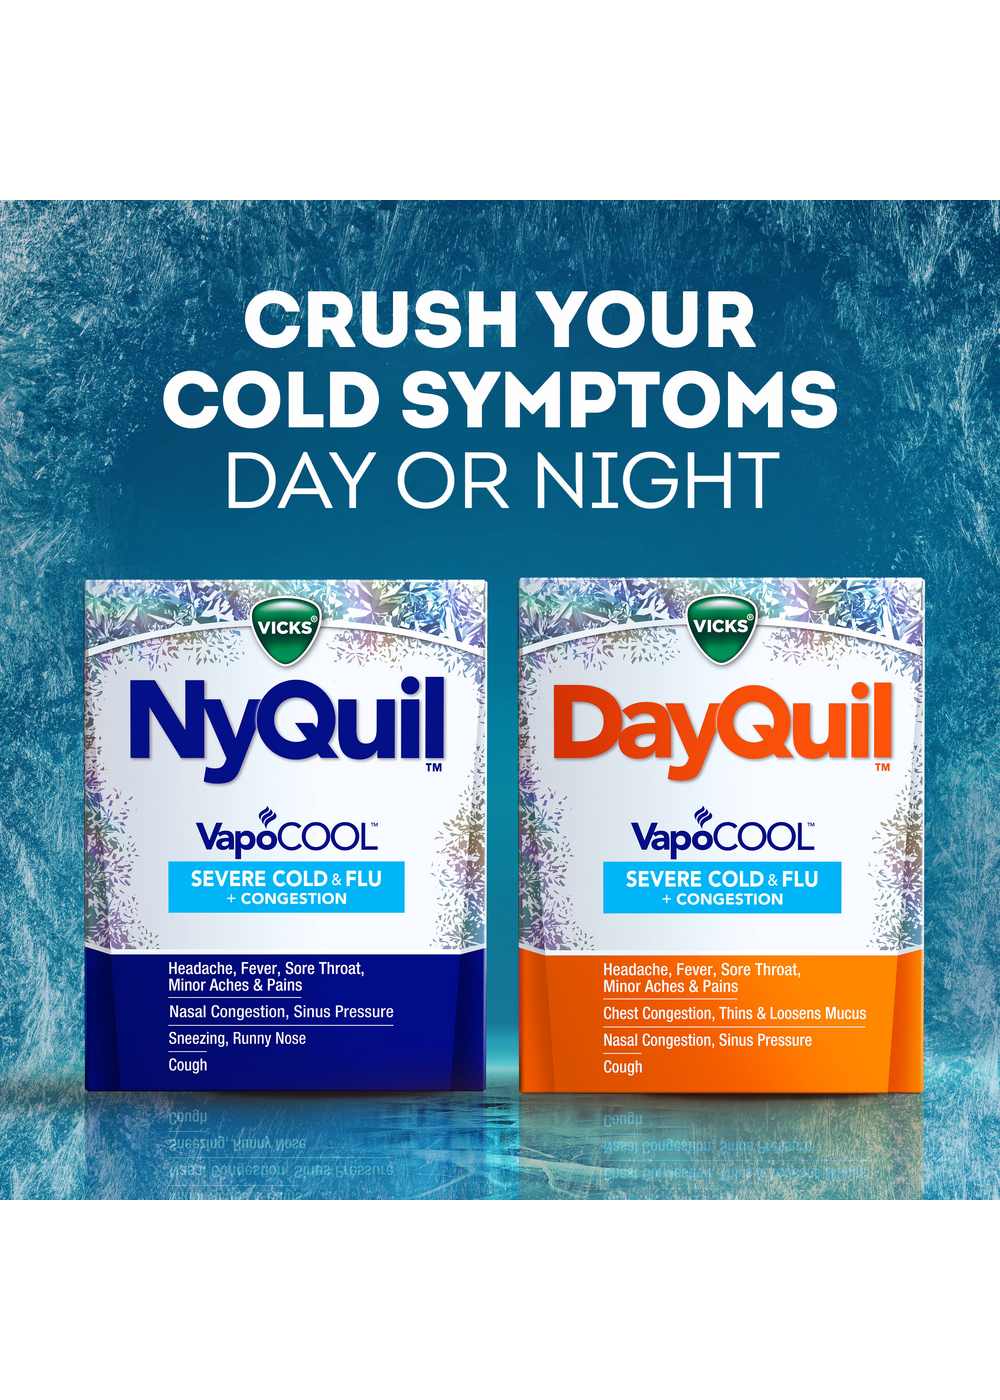 Vicks DayQuil + NyQuil VapoCOOL SEVERE  Cold & Flu + Congestion Combo Pack; image 4 of 8